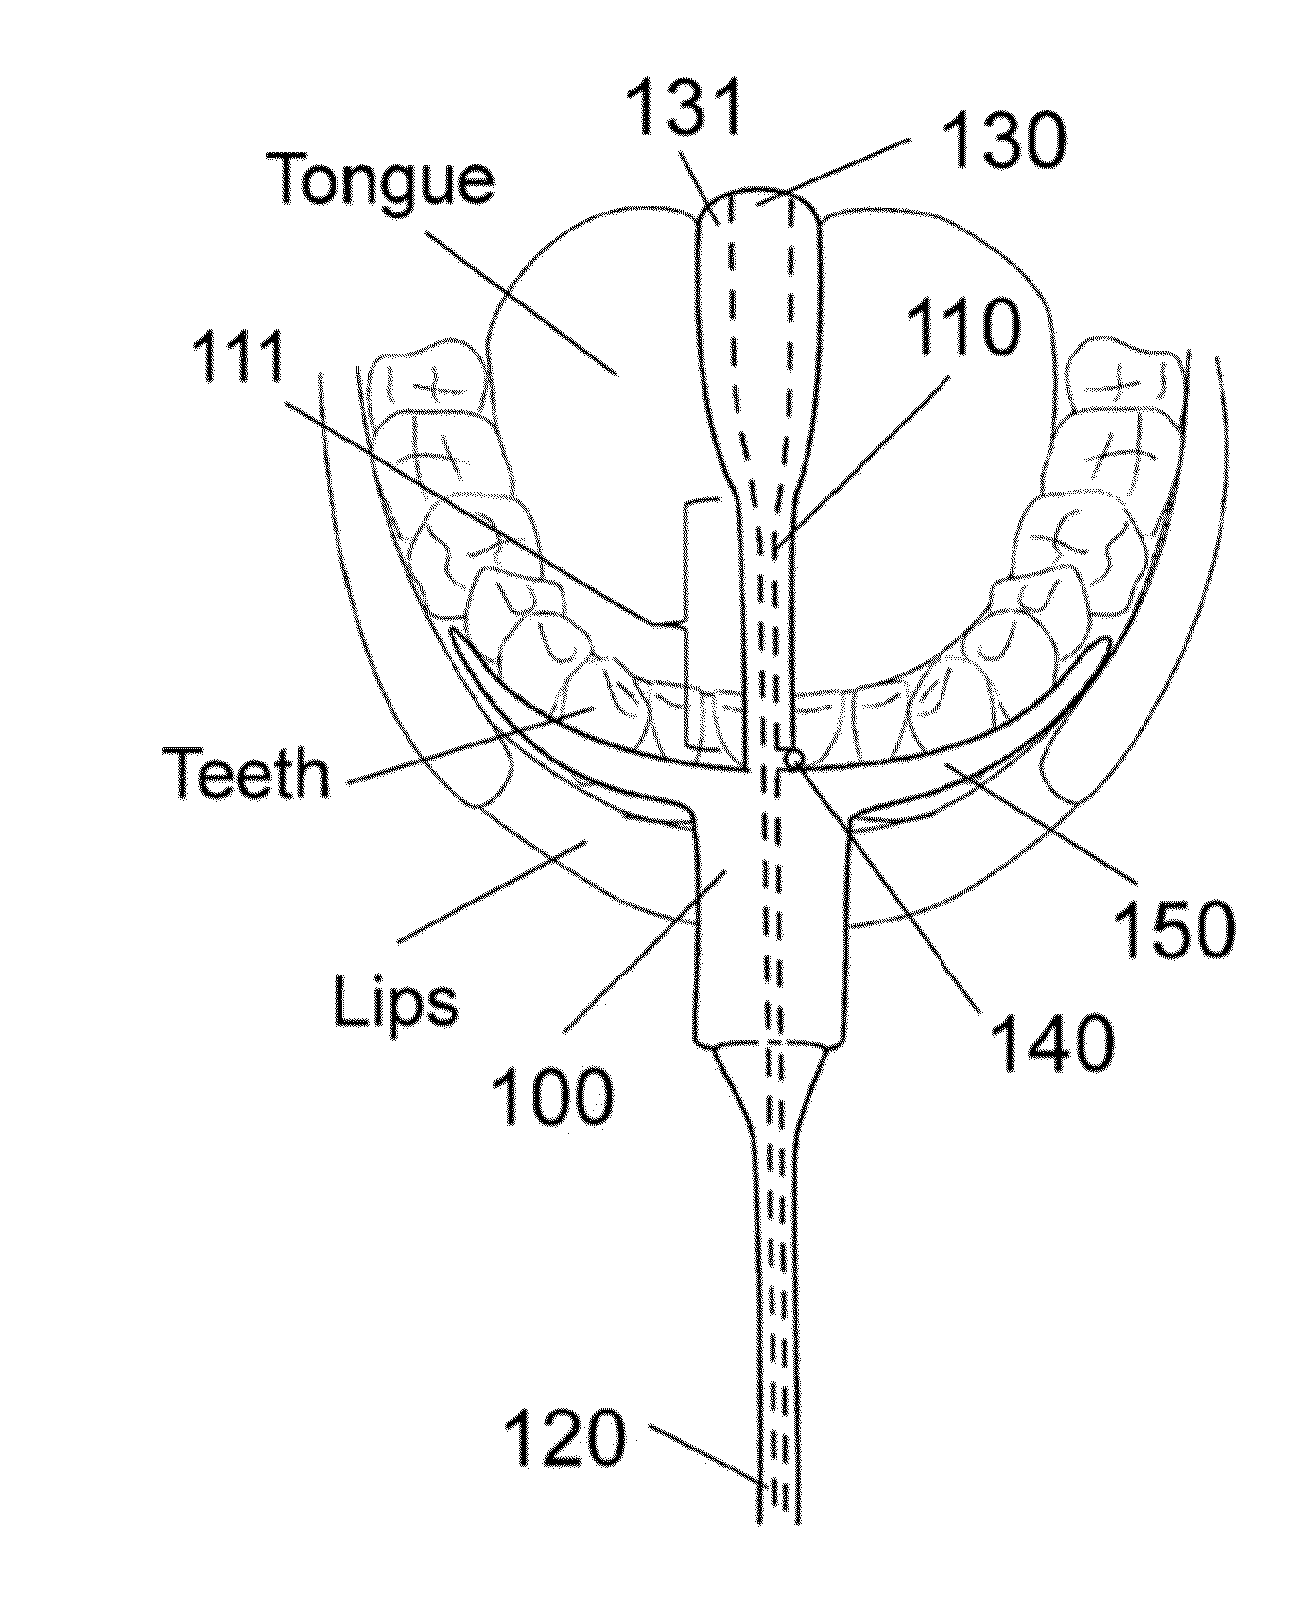 Oral device to eliminate air space in oral cavity